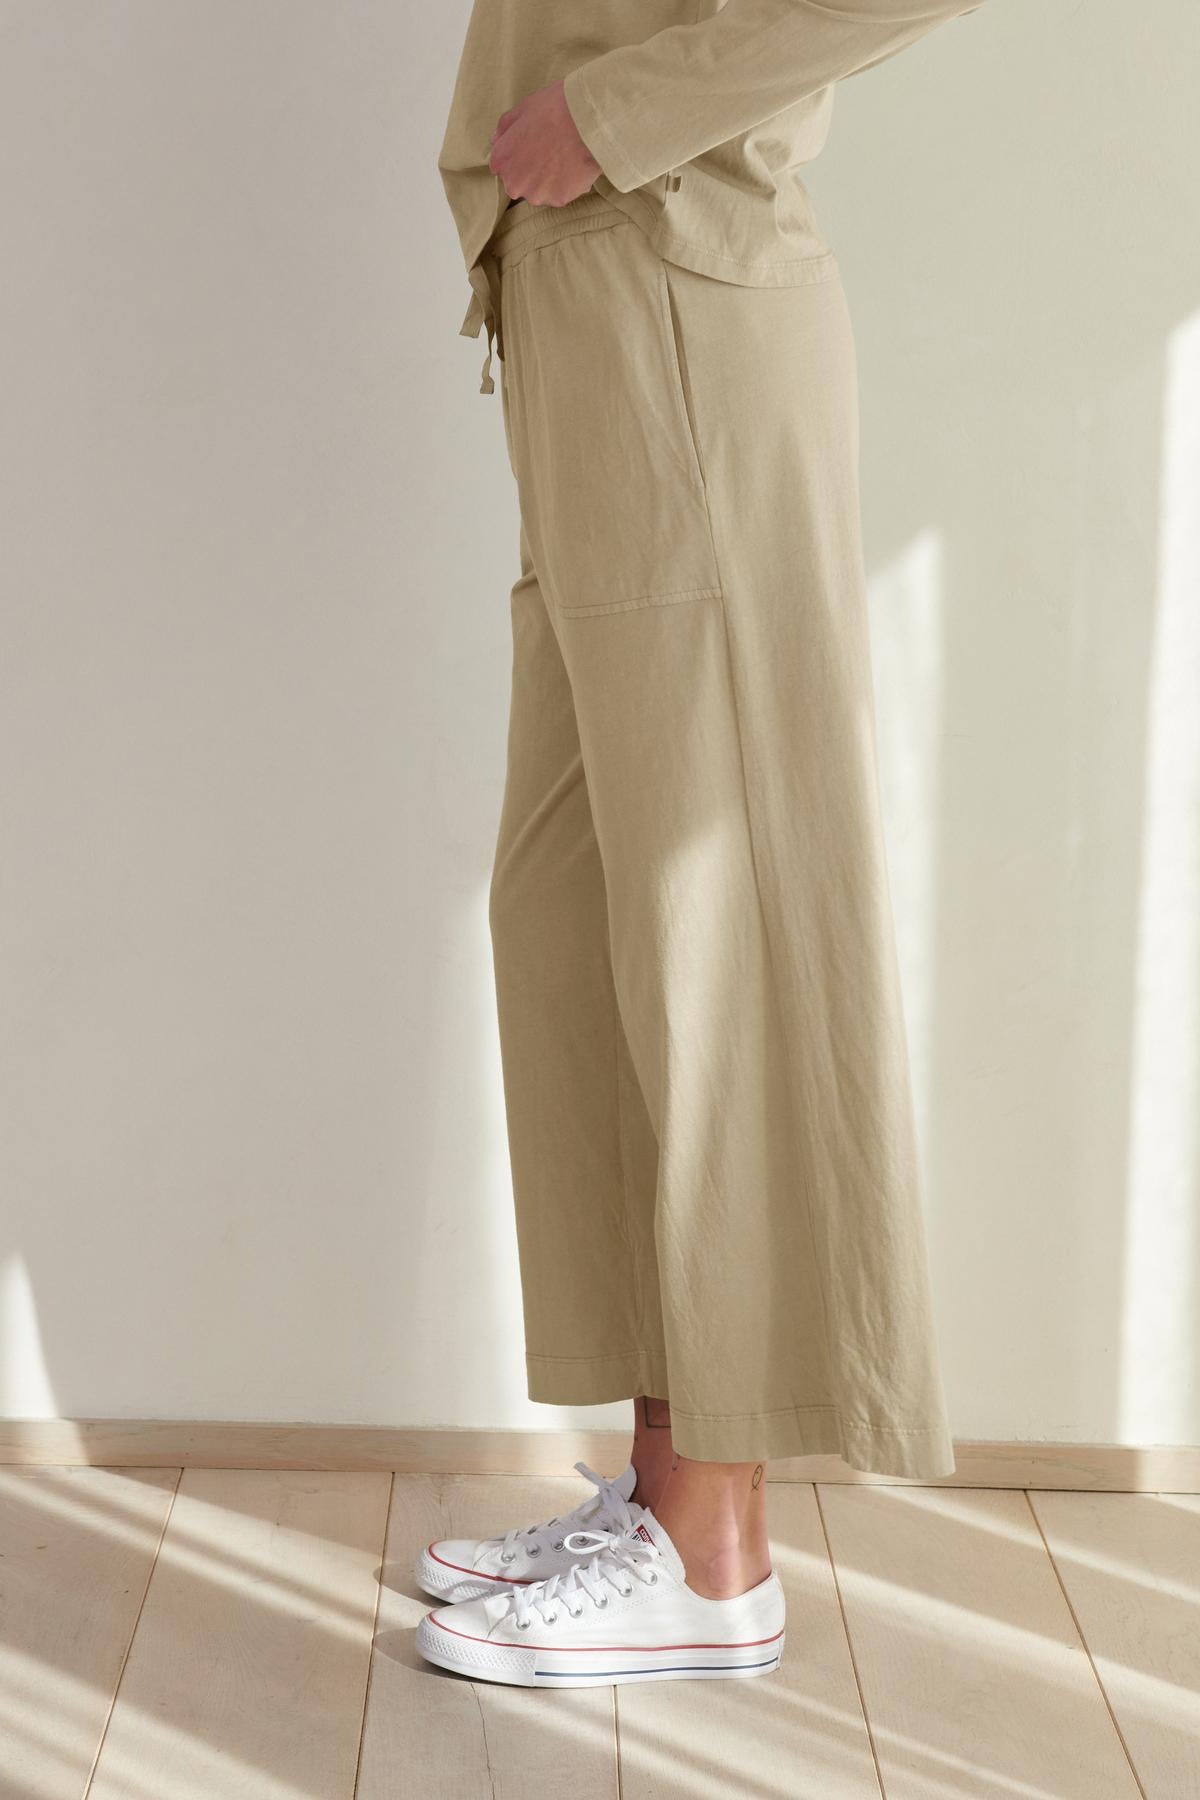 Person wearing Velvet by Jenny Graham PISMO PANT straight-leg pants and white sneakers standing in a room with natural light.-36463776530625